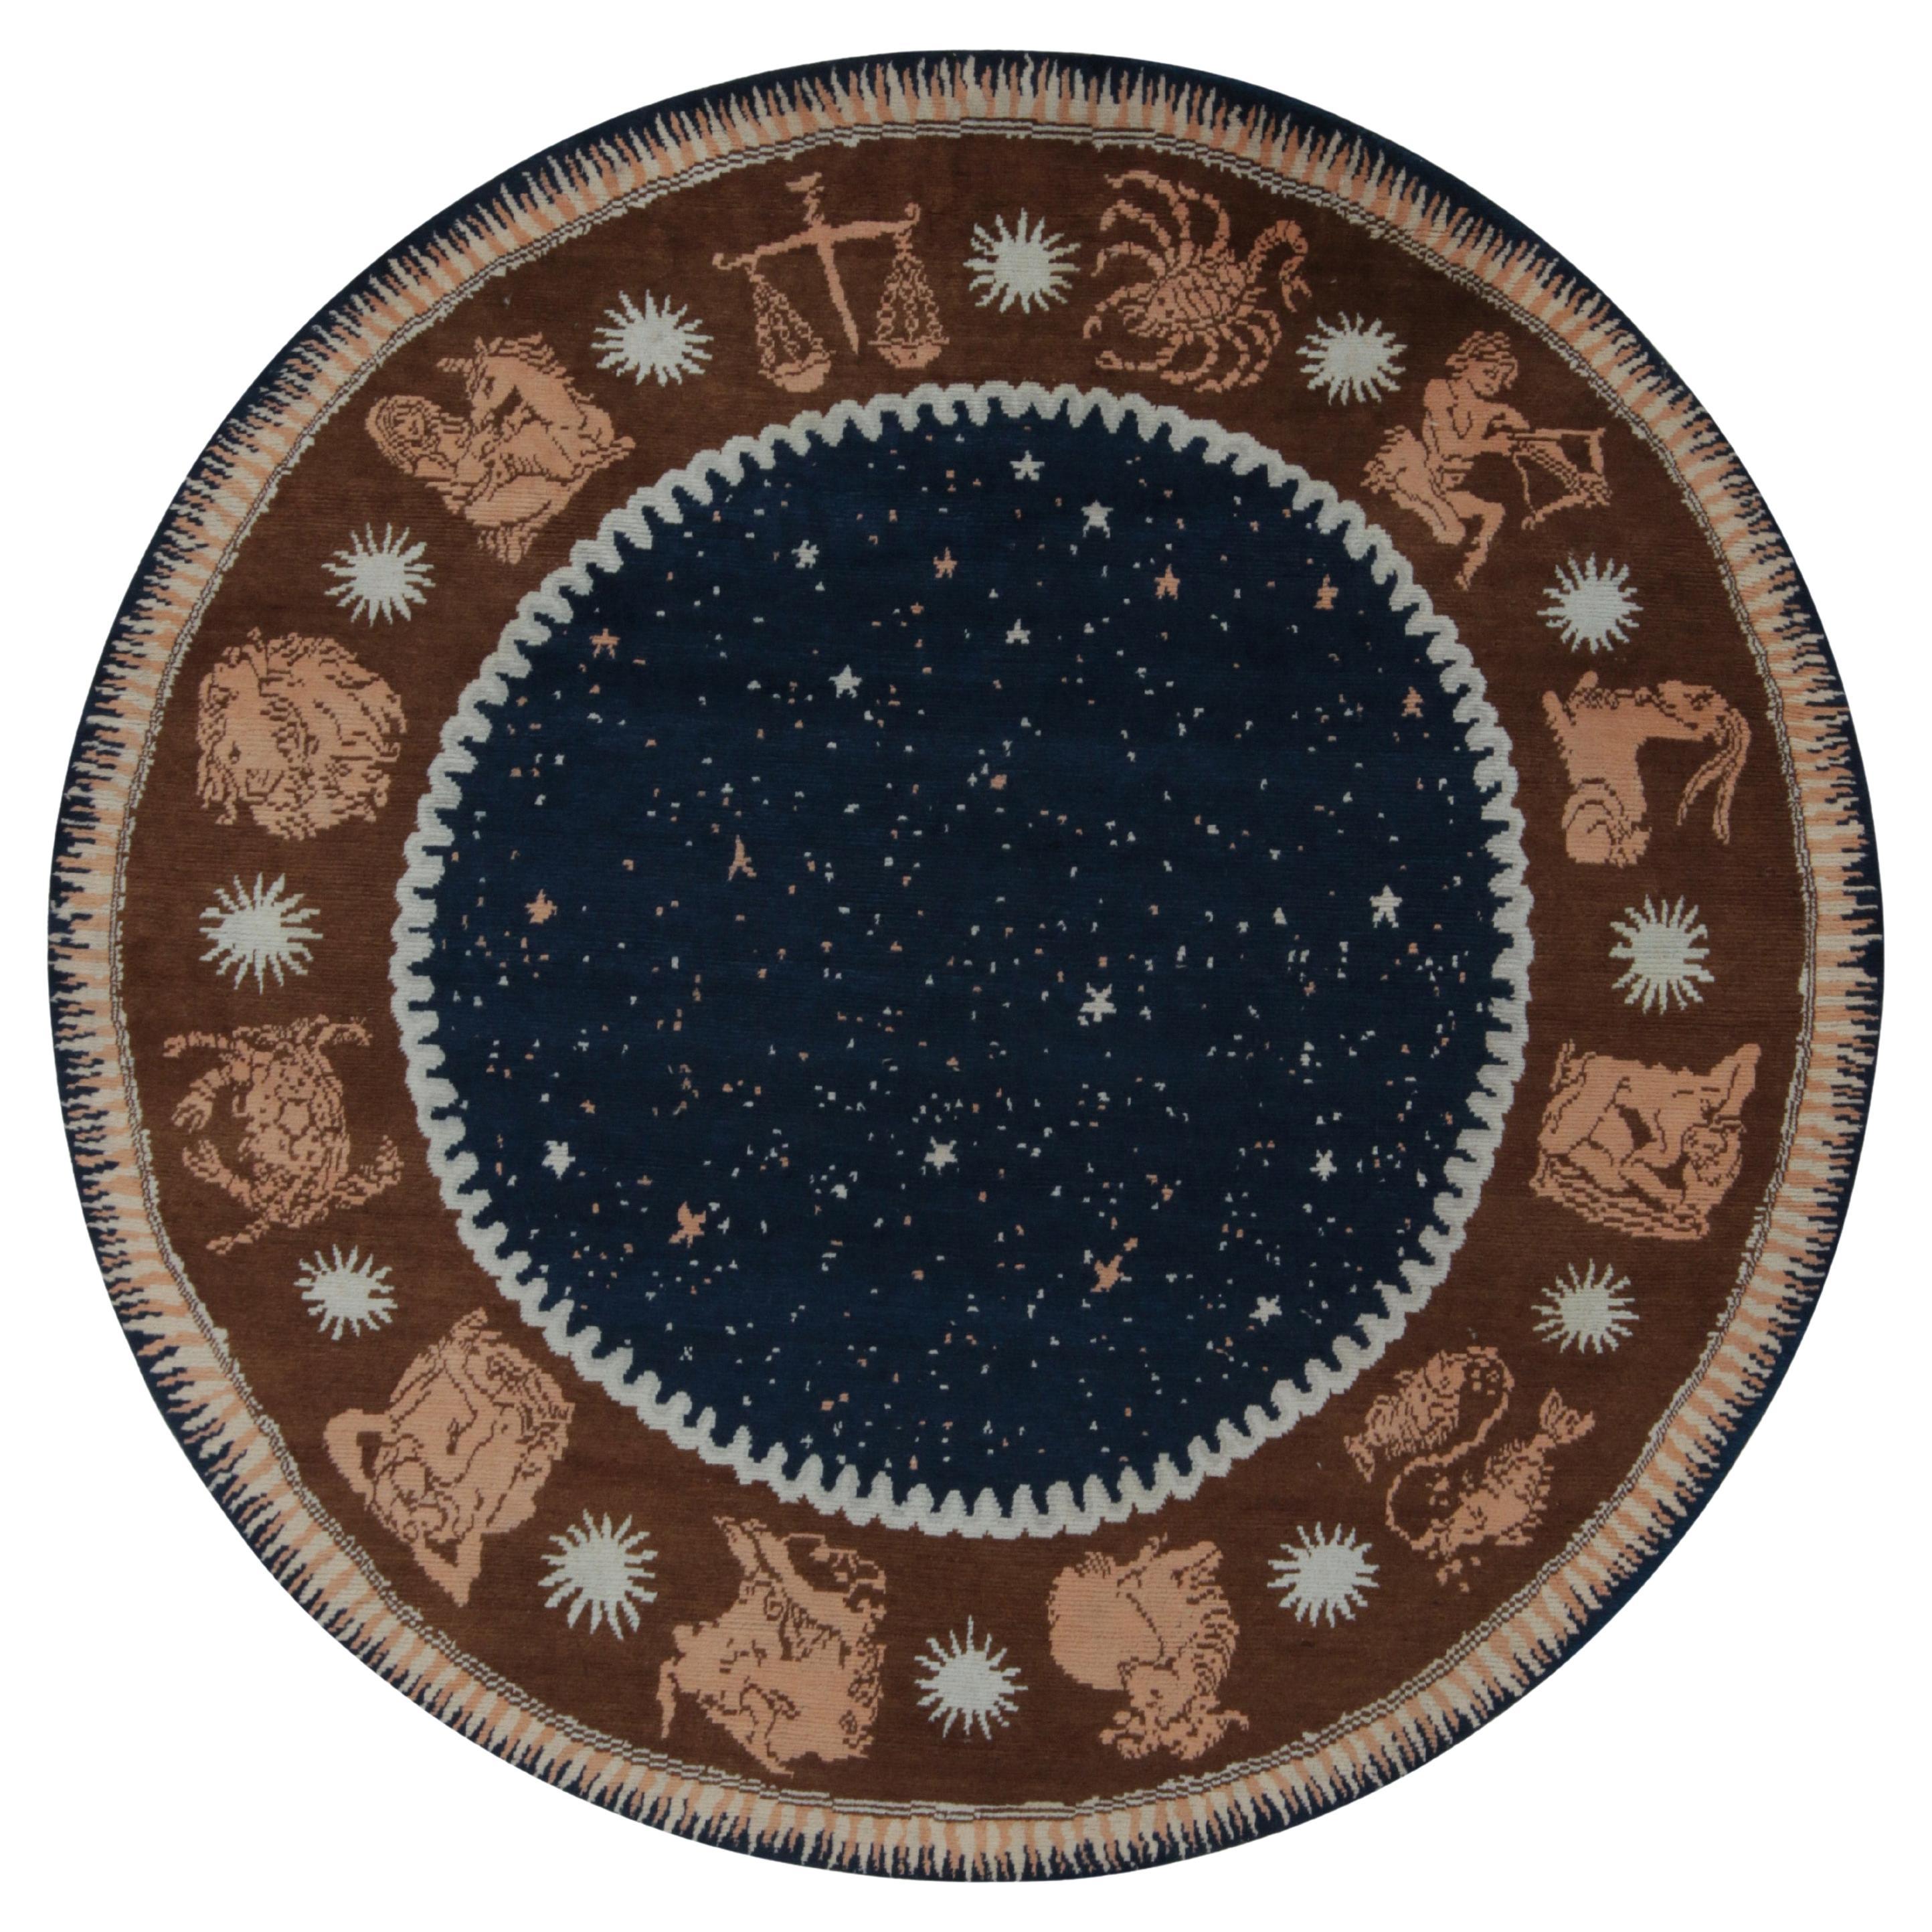 Rug & Kilim’s French Deco Style Circle Rug in Blue, Beige-Brown Zodiac Pictorial For Sale